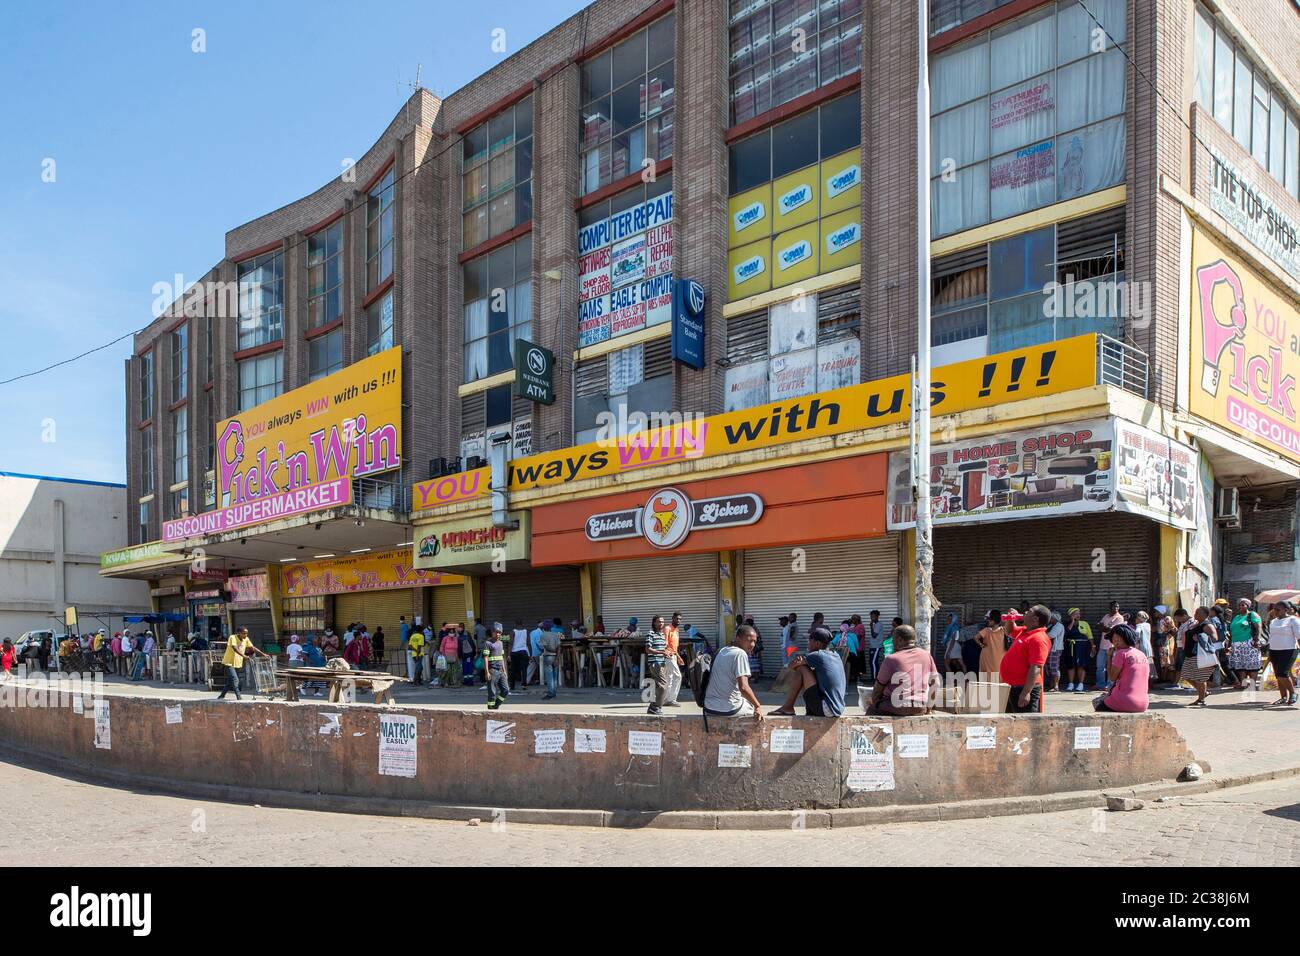 People queue in Durban during the Corona Virus Pandemic Stock Photo